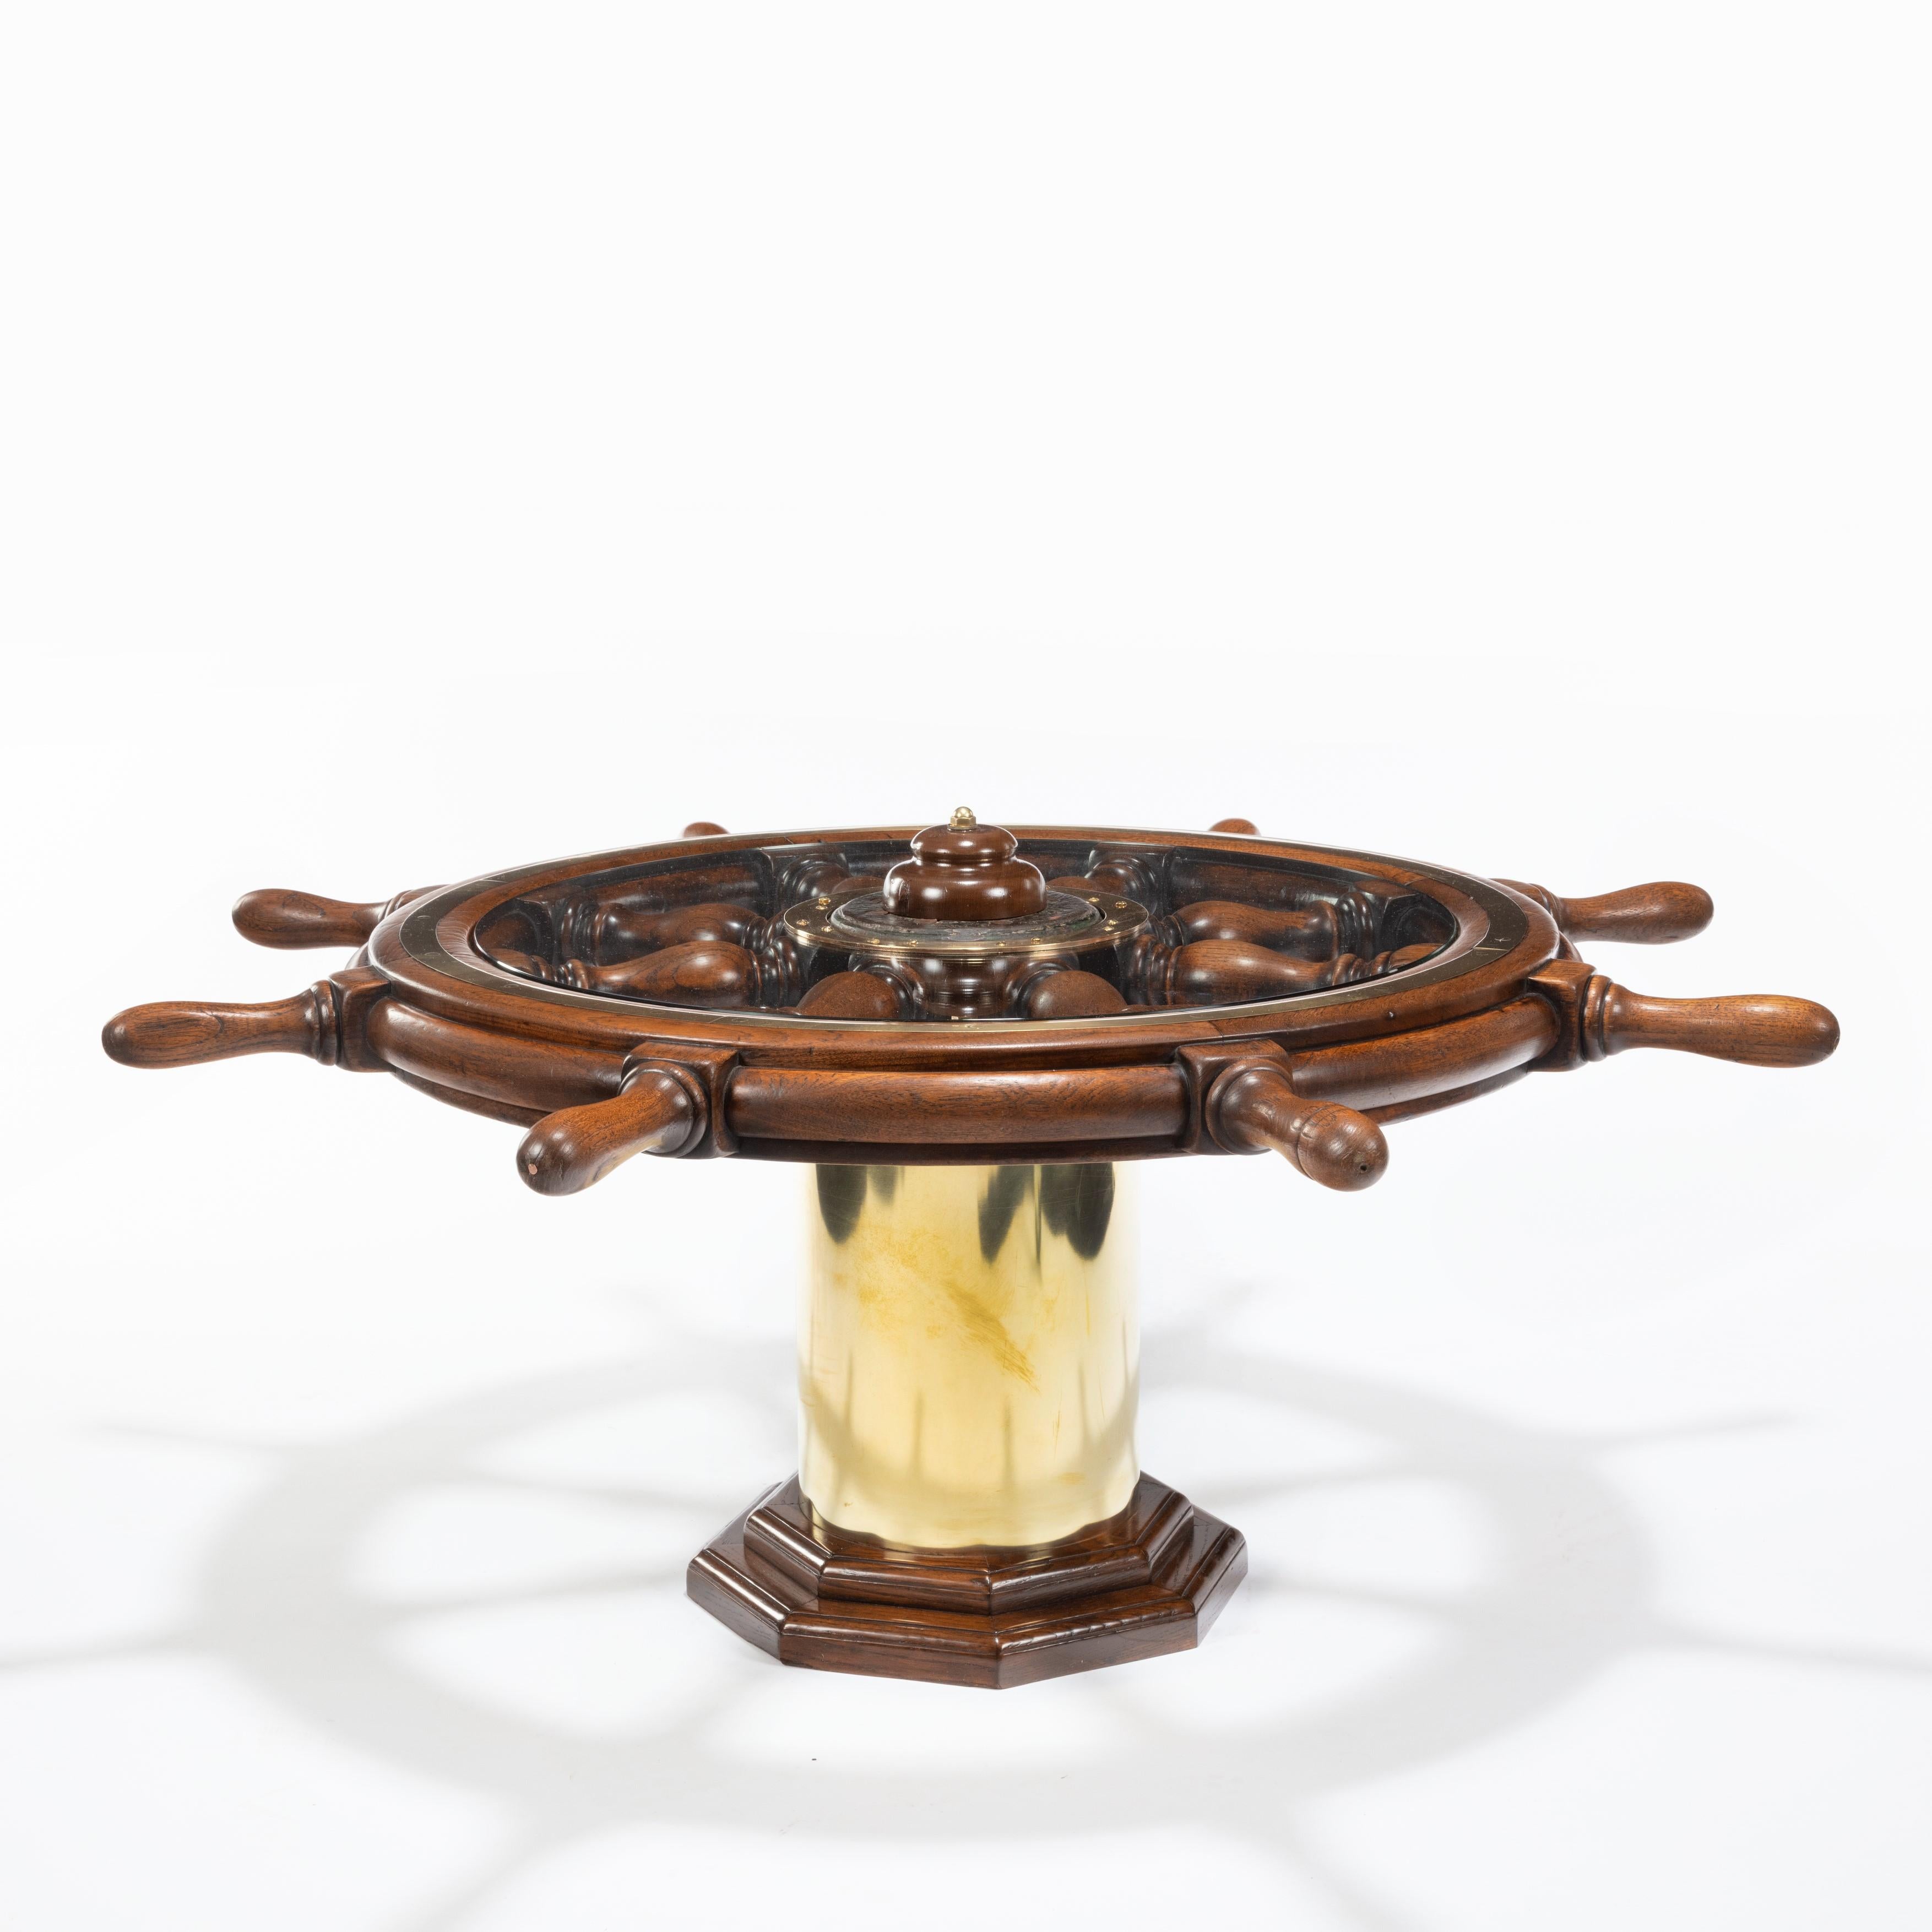 A late Victorian teak steering wheel, raised on a later brass cylindrical base and inset with a glass top to form a coffee table. English, circa 1900.
     